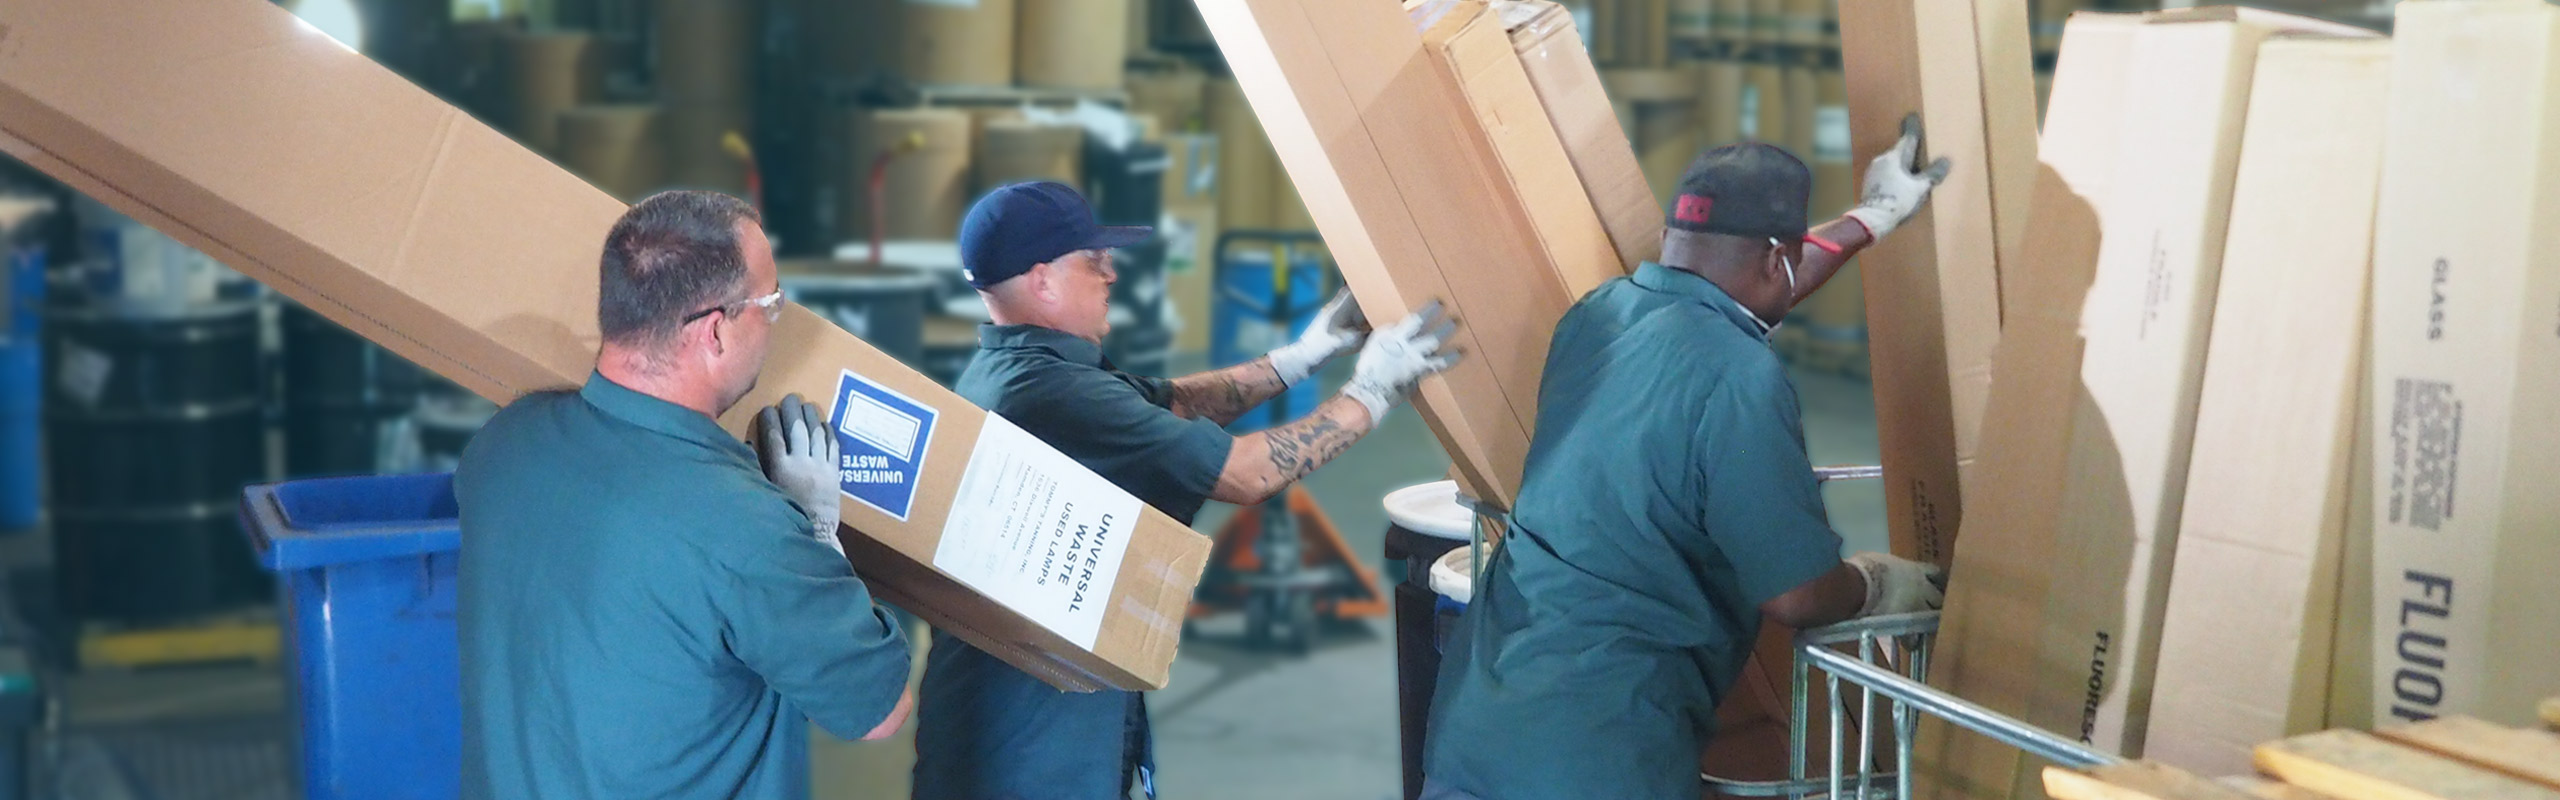 A picture of three NLR workers unloading boxes of spent fluorescent lamps in our UWH warehouse. NLR recycles fluorescent lamps and other universal waste.